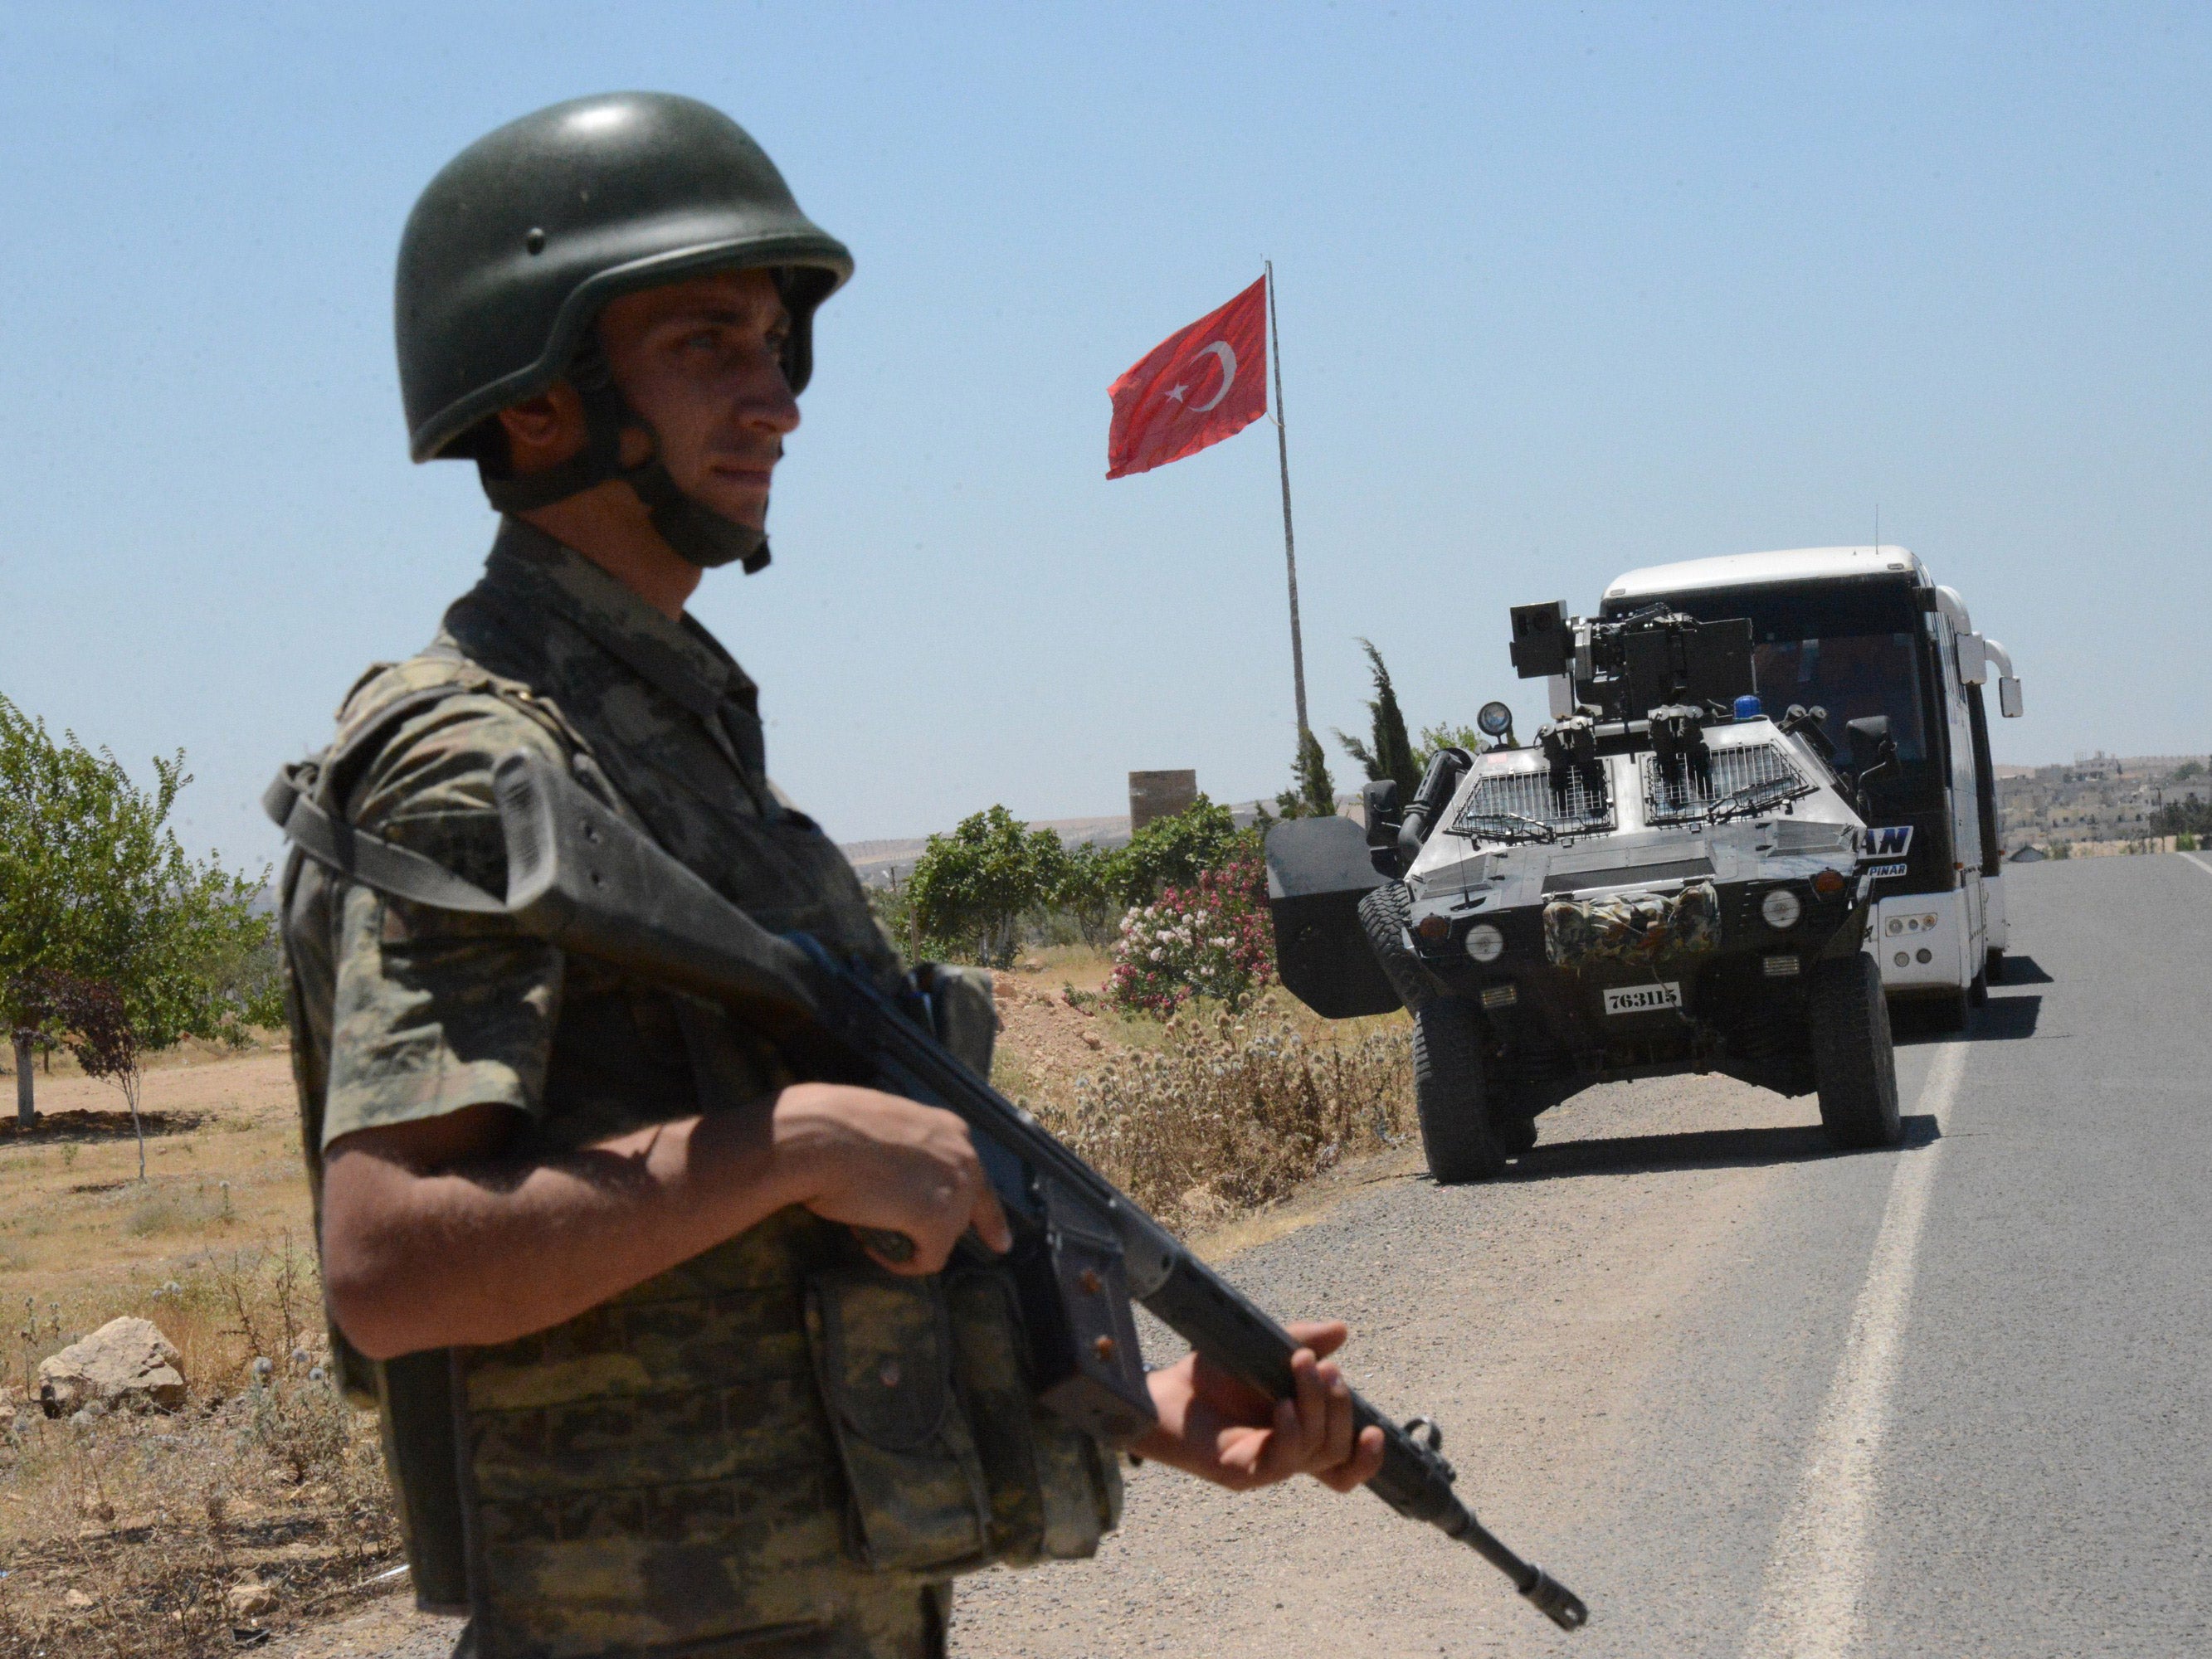 A Turkish solider on the border with Syria